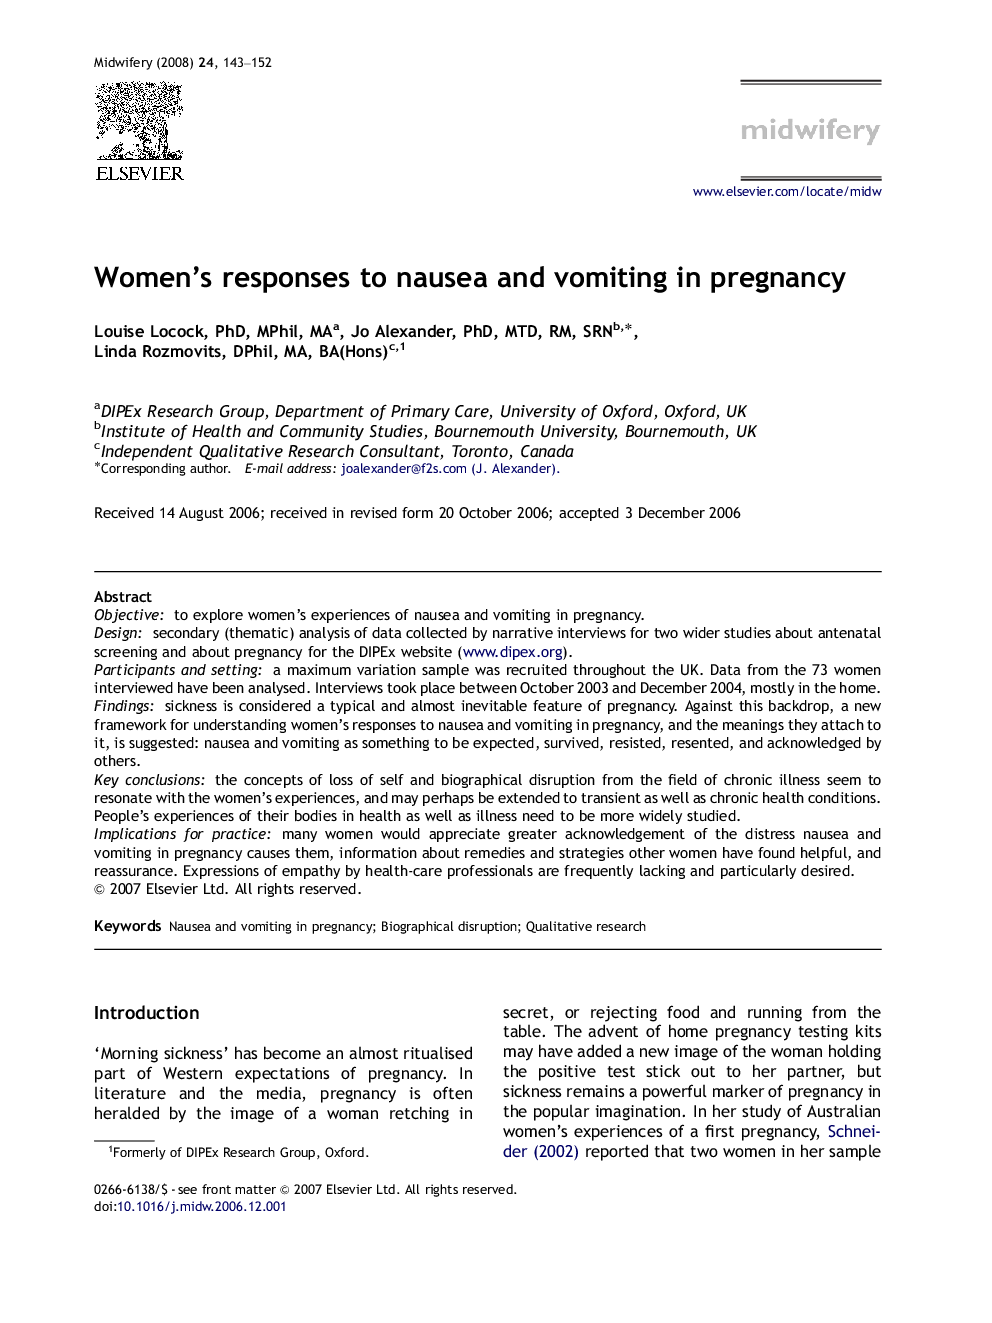 Women's responses to nausea and vomiting in pregnancy